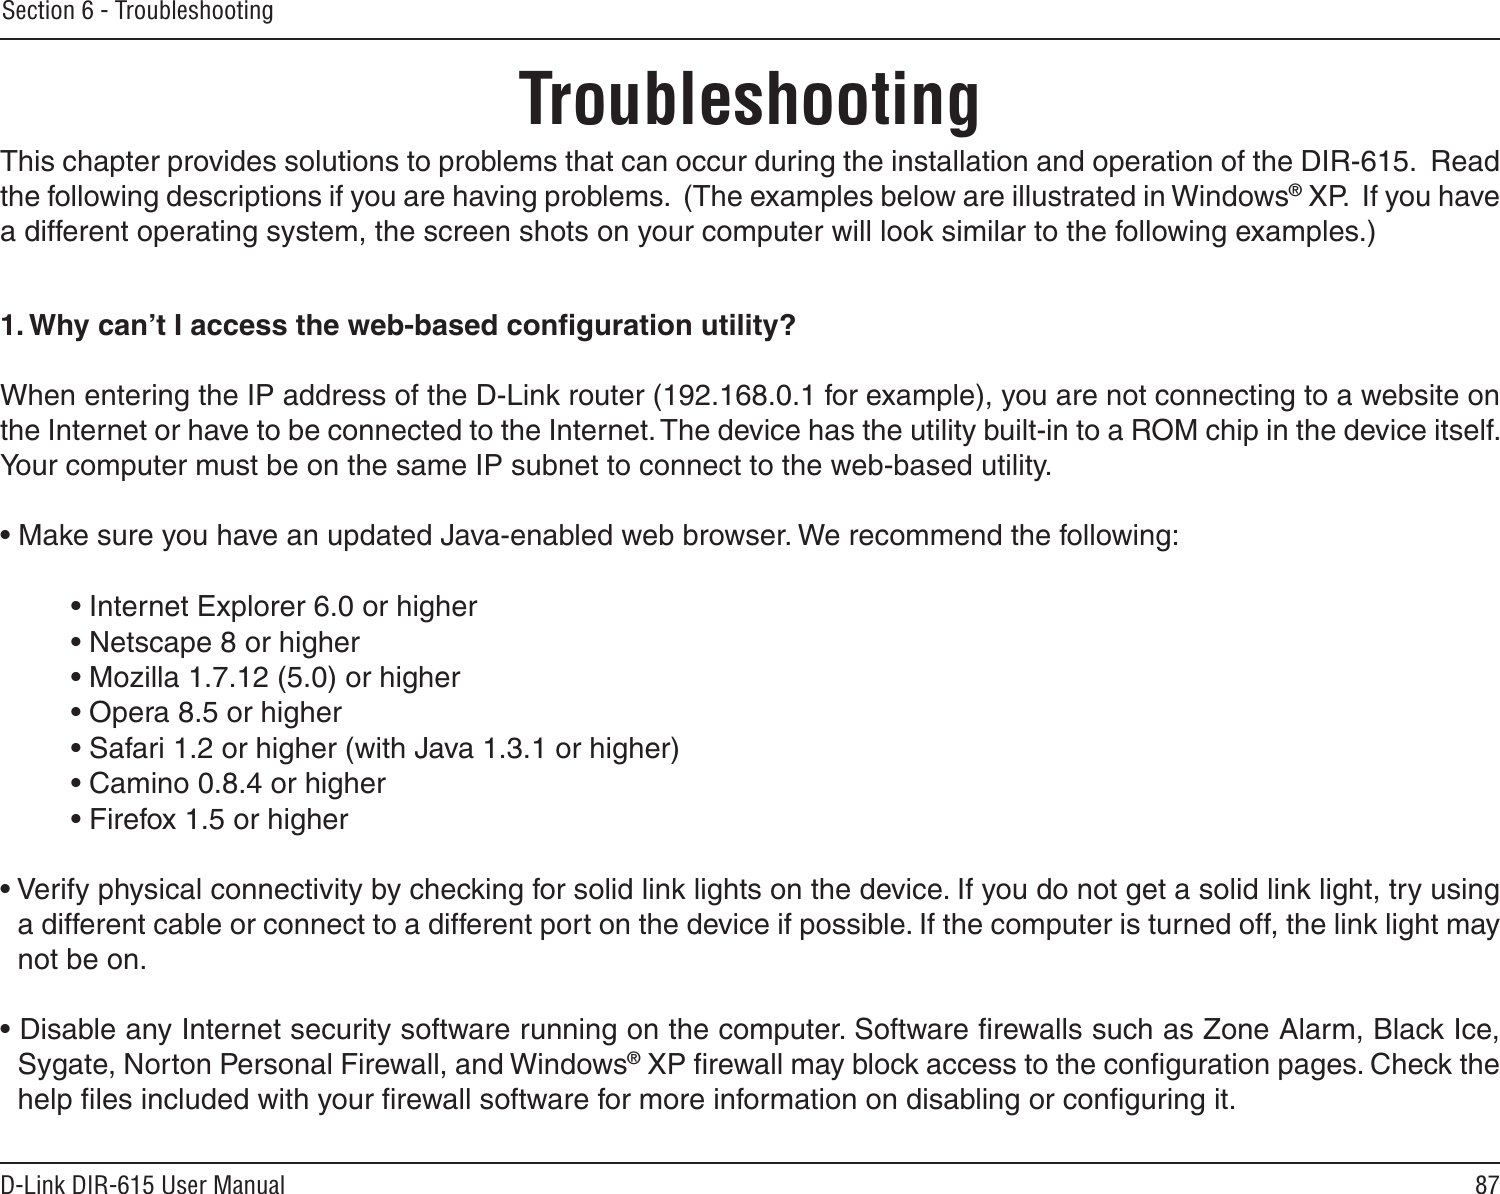 87D-Link DIR-615 User ManualSection 6 - TroubleshootingTroubleshootingThis chapter provides solutions to problems that can occur during the installation and operation of the DIR-615.  Read the following descriptions if you are having problems.  (The examples below are illustrated in Windows® XP.  If you have a different operating system, the screen shots on your computer will look similar to the following examples.)1. Why can’t I access the web-based conﬁguration utility?When entering the IP address of the D-Link router (192.168.0.1 for example), you are not connecting to a website on the Internet or have to be connected to the Internet. The device has the utility built-in to a ROM chip in the device itself. Your computer must be on the same IP subnet to connect to the web-based utility. • Make sure you have an updated Java-enabled web browser. We recommend the following: • Internet Explorer 6.0 or higher • Netscape 8 or higher • Mozilla 1.7.12 (5.0) or higher • Opera 8.5 or higher • Safari 1.2 or higher (with Java 1.3.1 or higher) • Camino 0.8.4 or higher • Firefox 1.5 or higher • Verify physical connectivity by checking for solid link lights on the device. If you do not get a solid link light, try using a different cable or connect to a different port on the device if possible. If the computer is turned off, the link light may not be on.• Disable any Internet security software running on the computer. Software ﬁrewalls such as Zone Alarm, Black Ice, Sygate, Norton Personal Firewall, and Windows® XP ﬁrewall may block access to the conﬁguration pages. Check the help ﬁles included with your ﬁrewall software for more information on disabling or conﬁguring it.